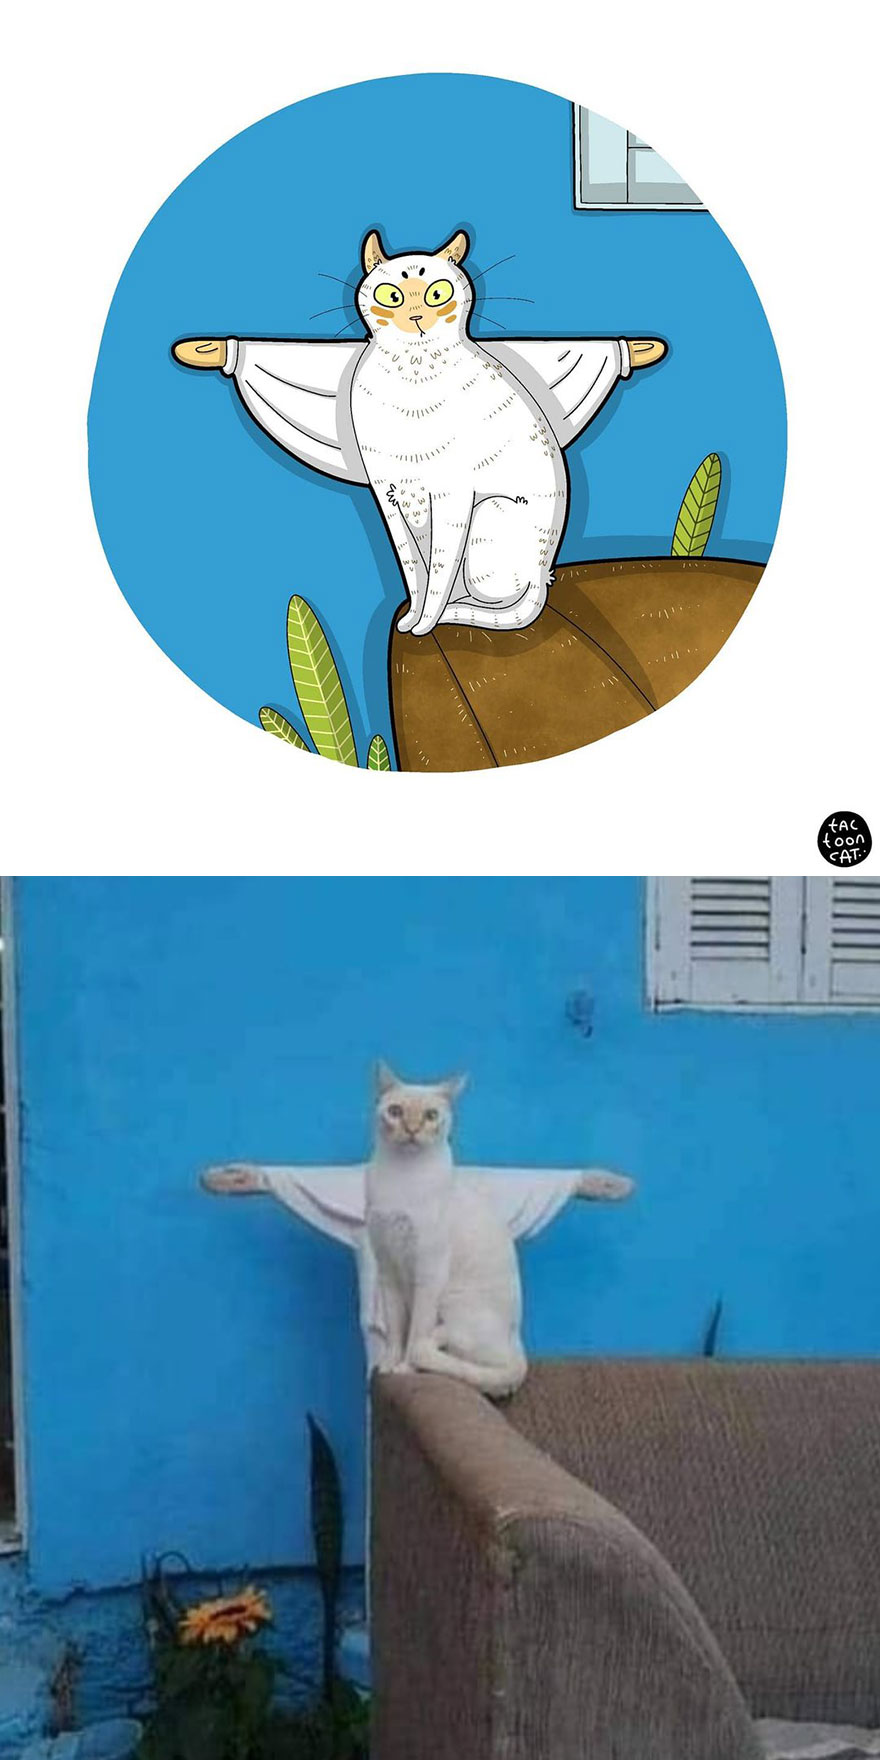 Viral Cat Memes Are Transformed Into Purr-Fect Cat Illustrations (New Pics)